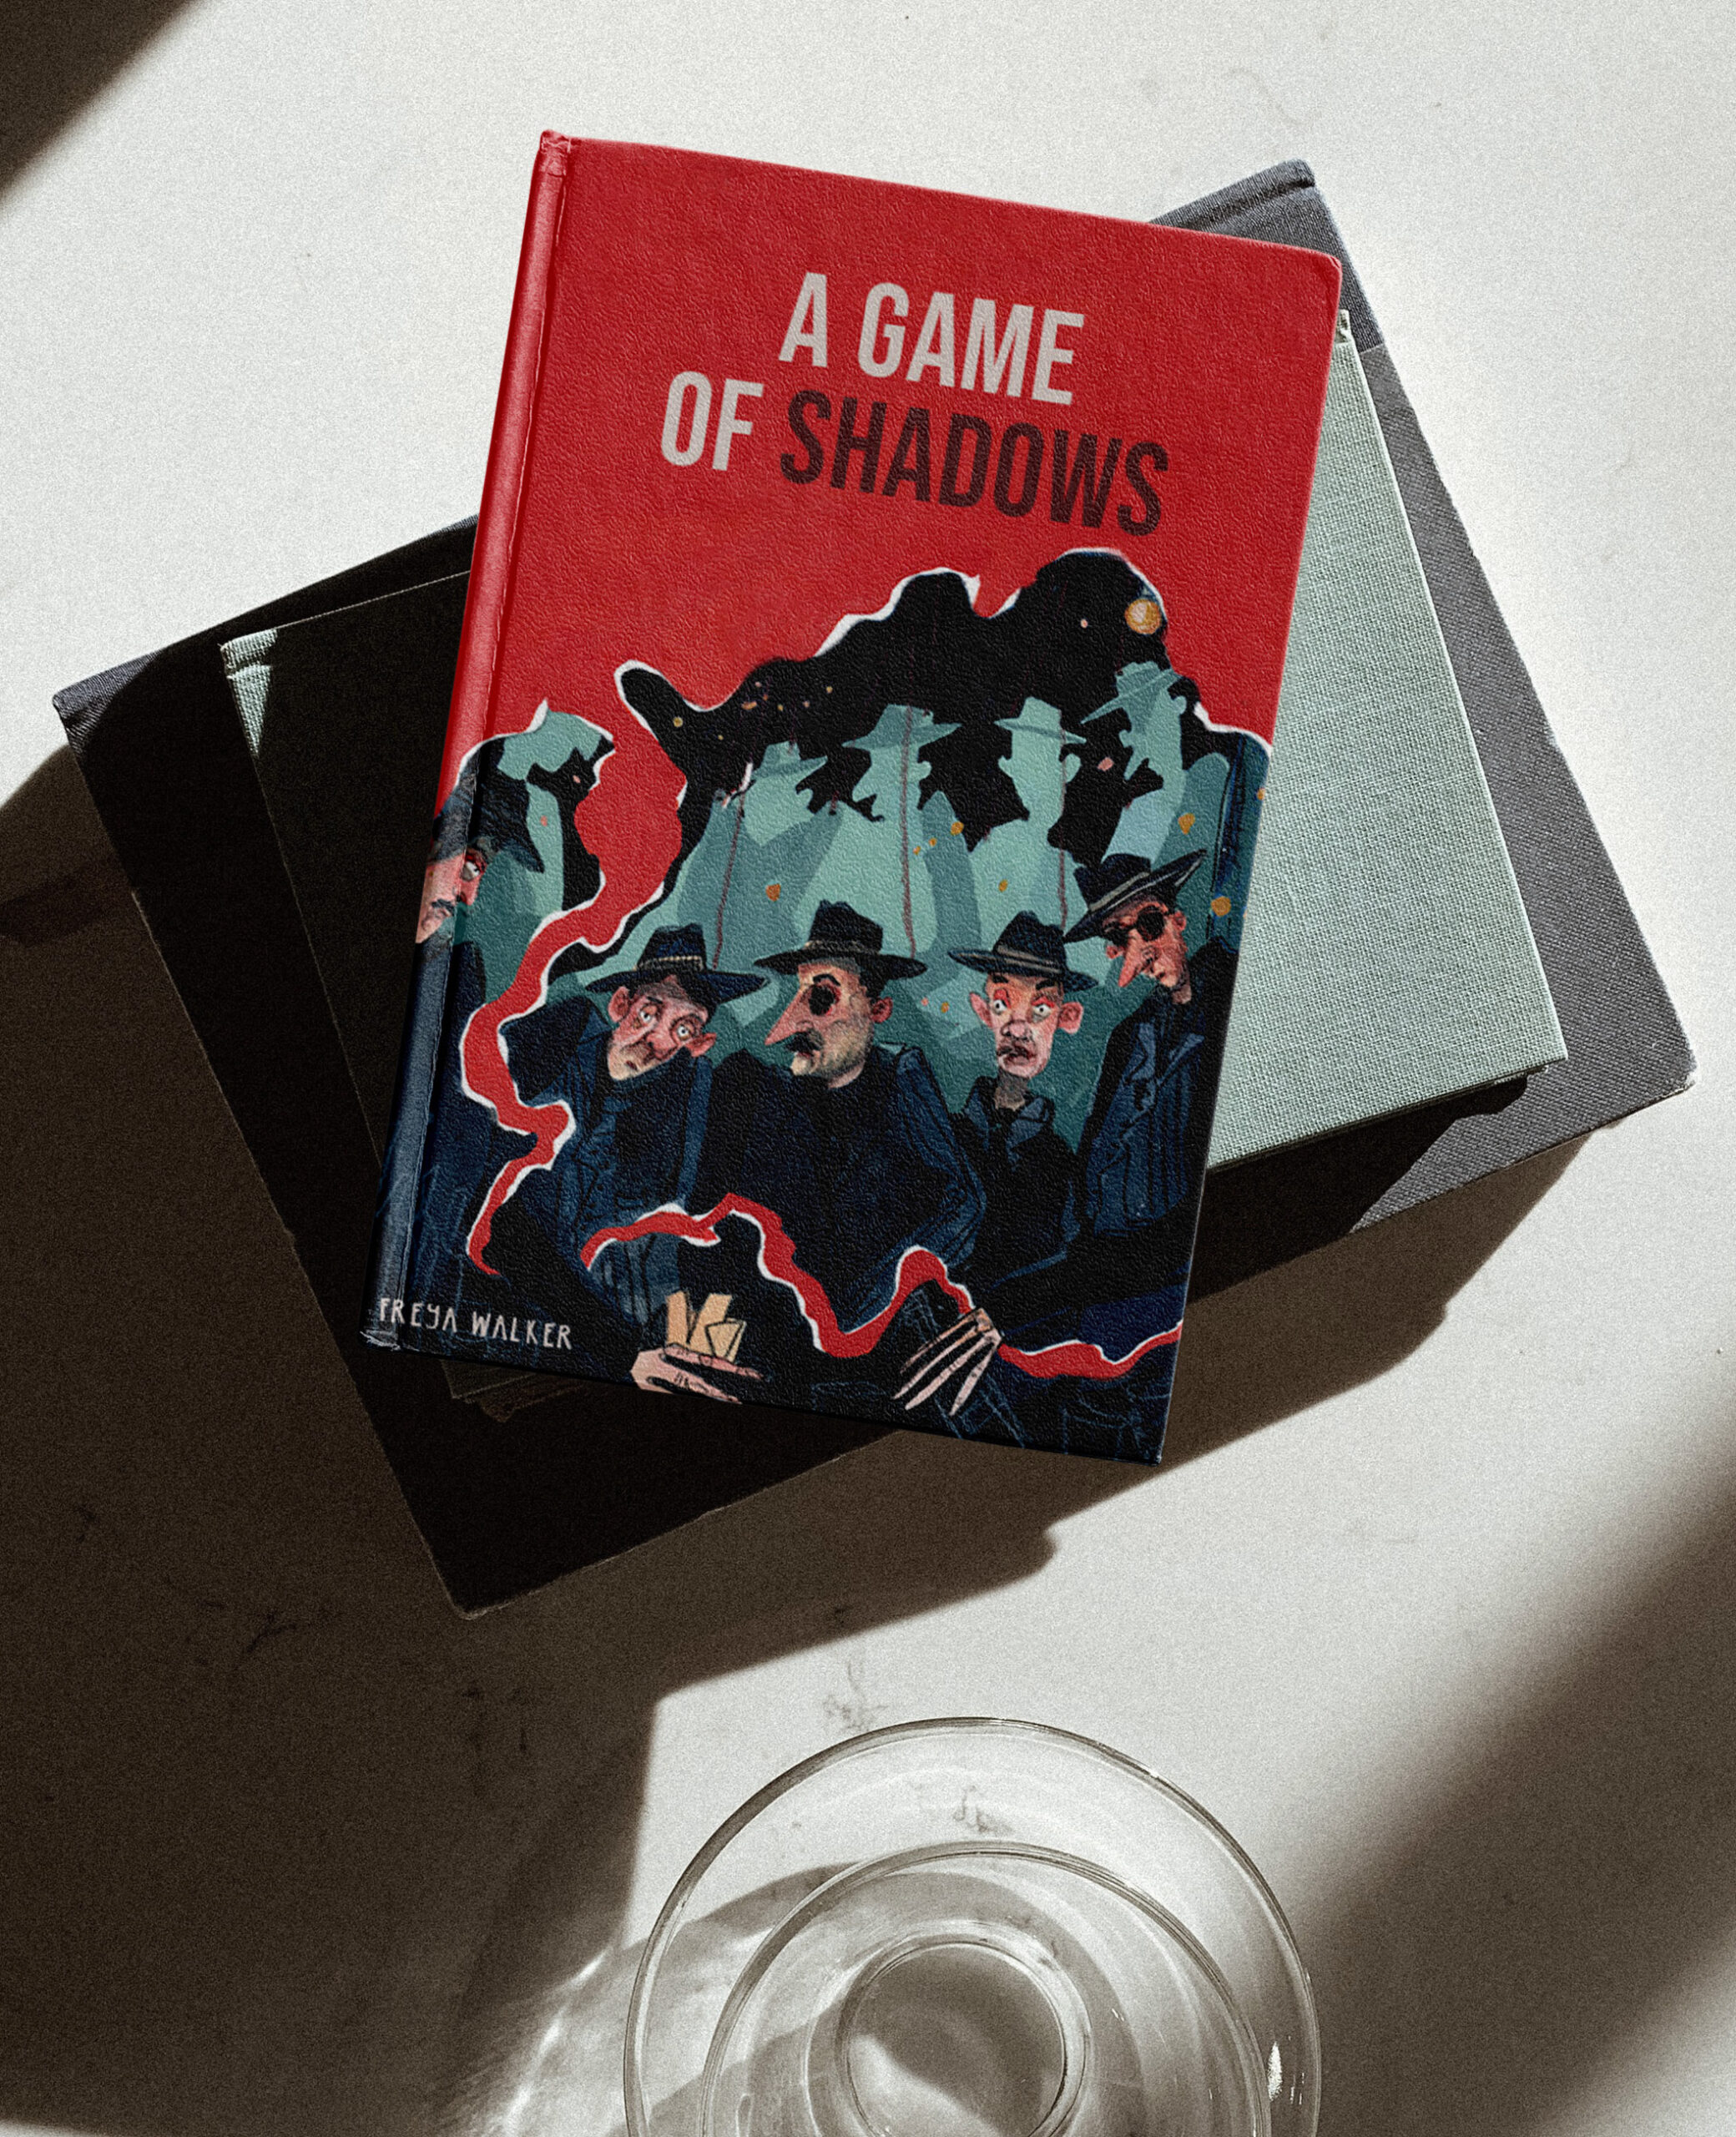 A-game-of-shadows-book-cover-mock-up-2